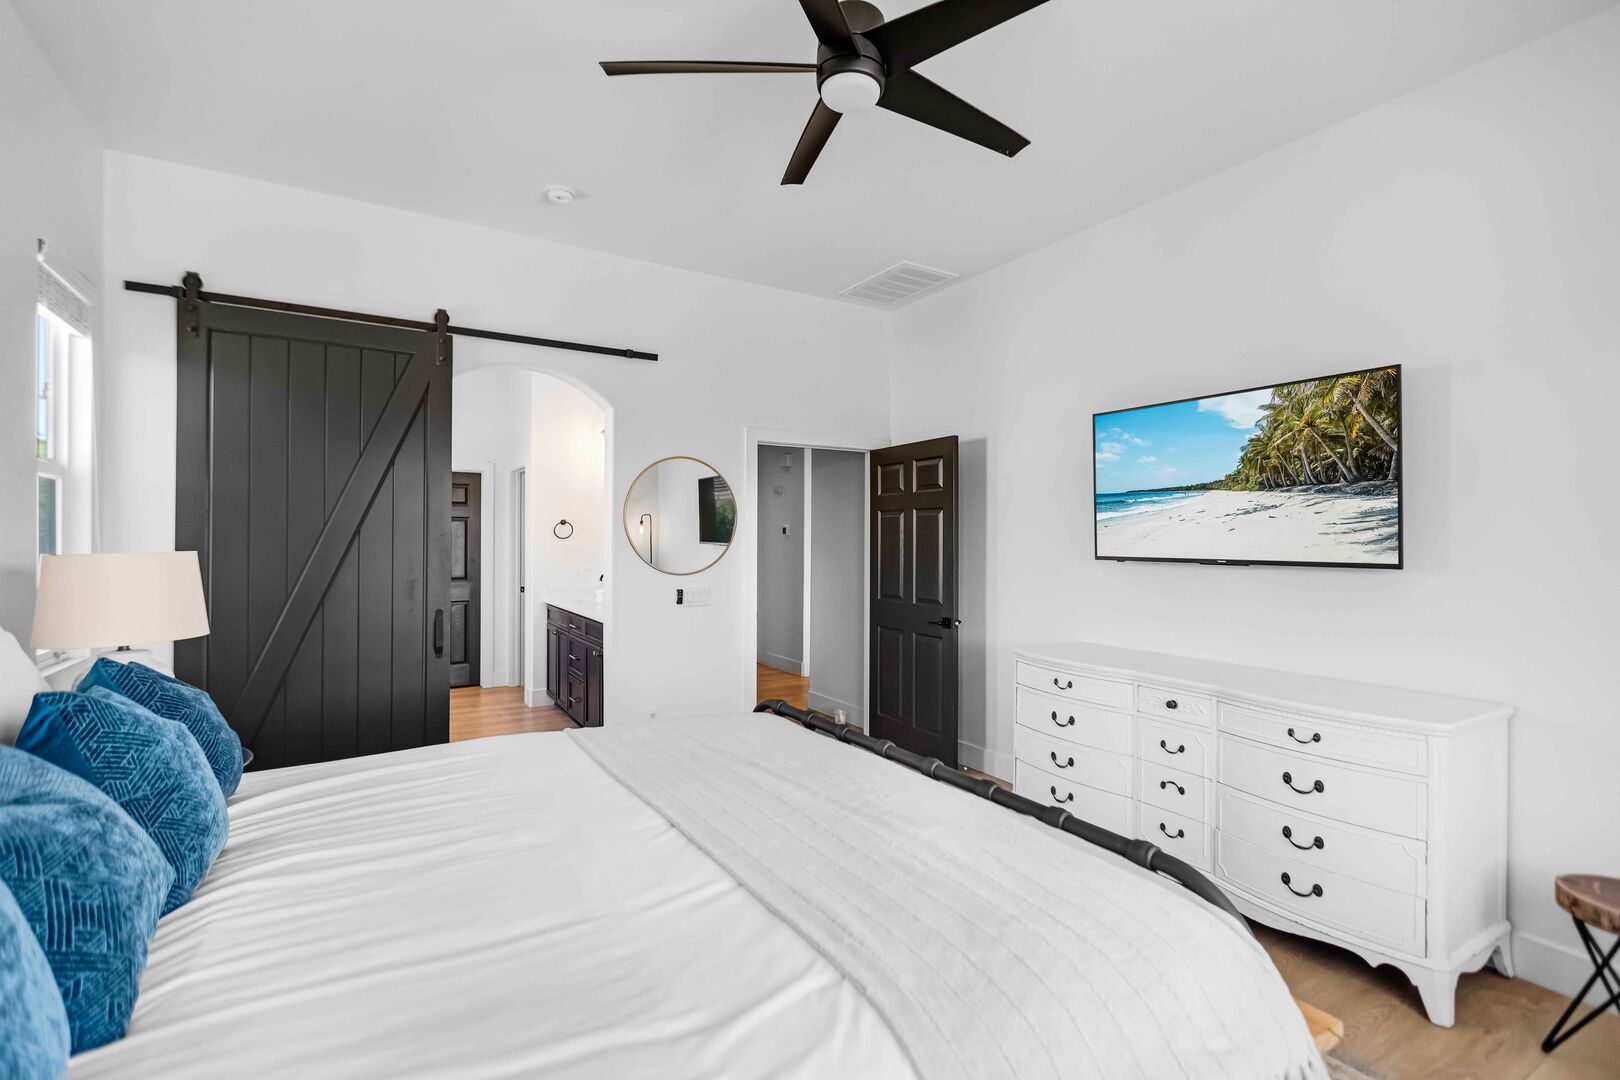 This bedroom boasts a sleek and elegant sliding barn door, giving you the option to keep it open for a spacious feel or close it for privacy— your choice.